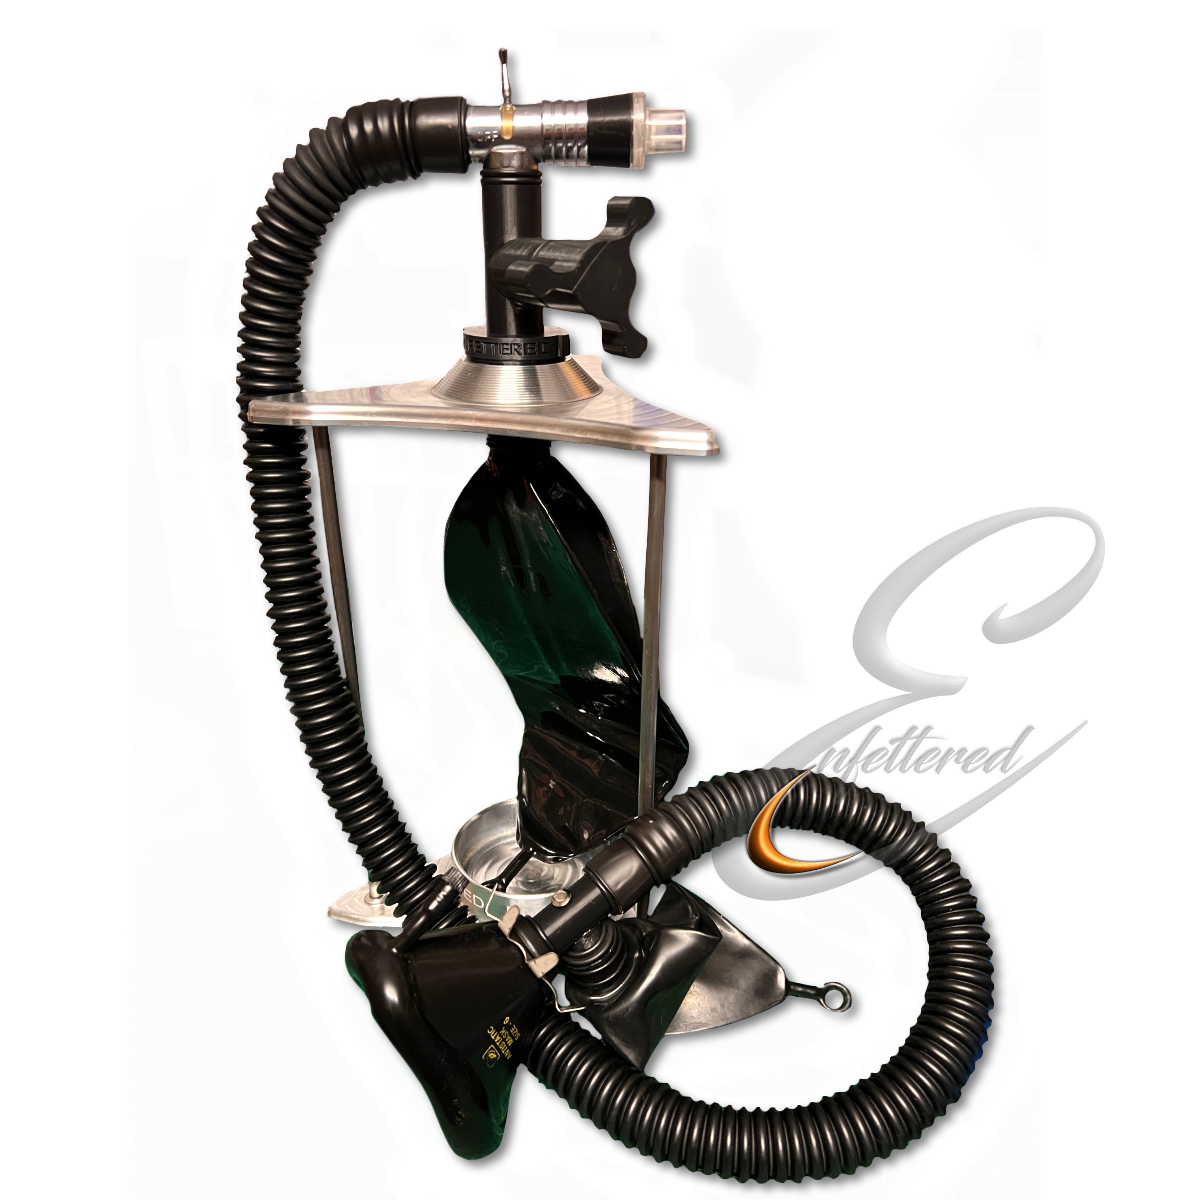 Enfettered Aroma ‘N’ Lungs REBREATHER Rig